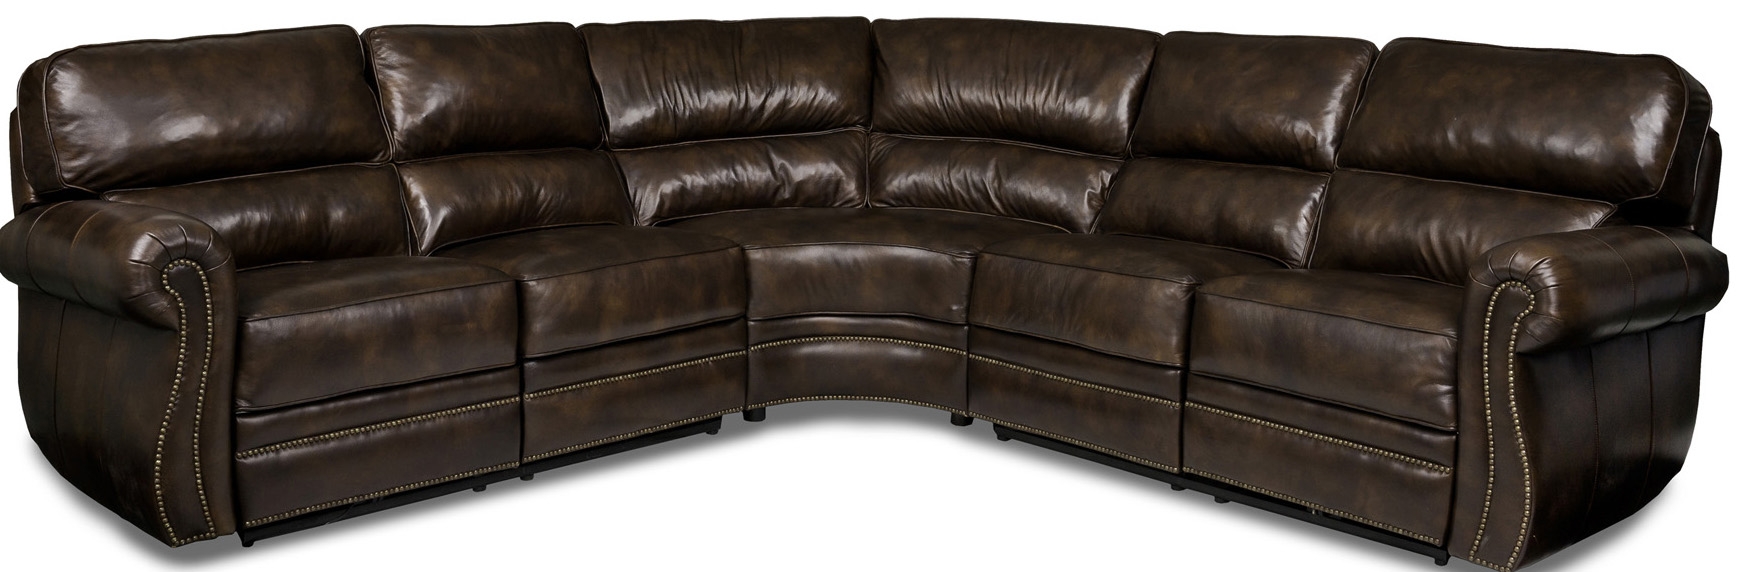 SECTIONALS - Leather & High End Upholstered Furniture Woodlands Sectional Sofa